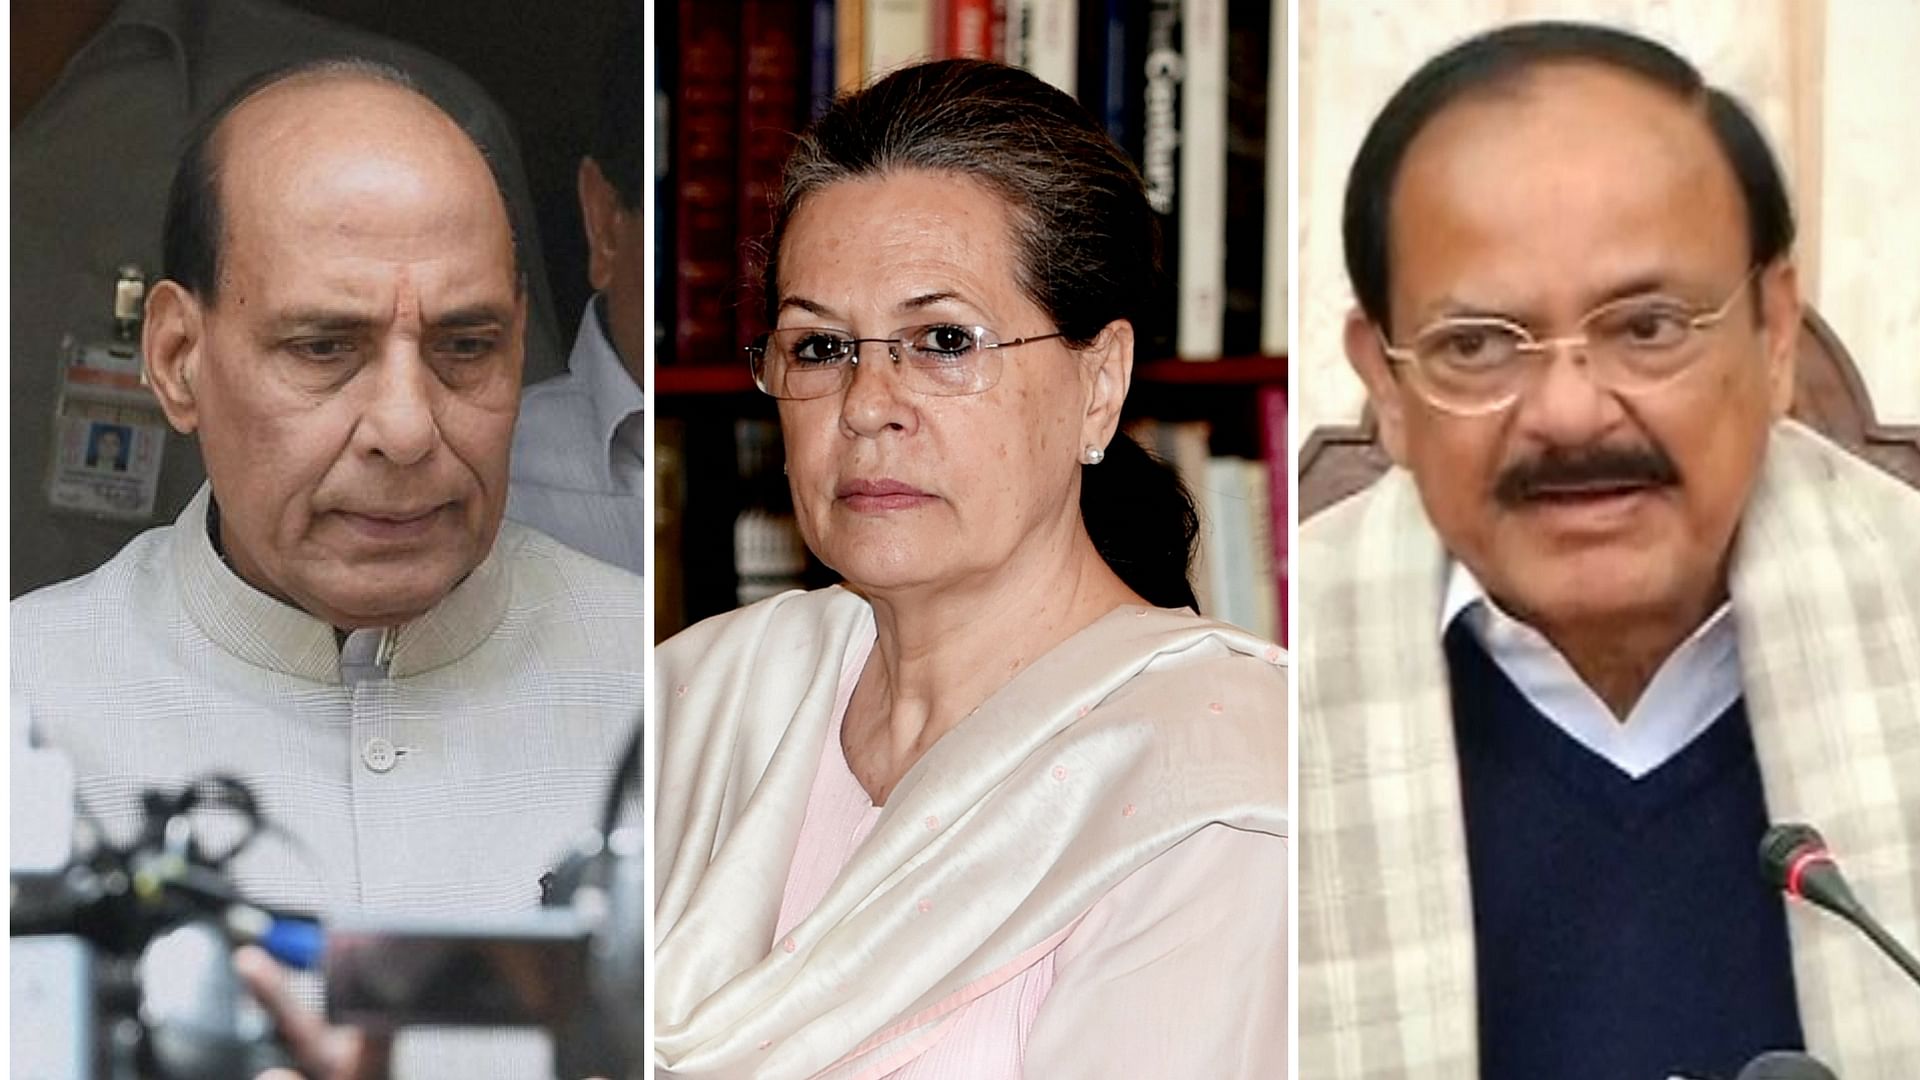 Home Minister Rajnath Singh and Union Minister Venkaiah Naidu will meet Congress President Sonia Gandhi to decide on the possibility of a consensual presidential candidate. (Photo: Altered by <b>The Quint</b>)